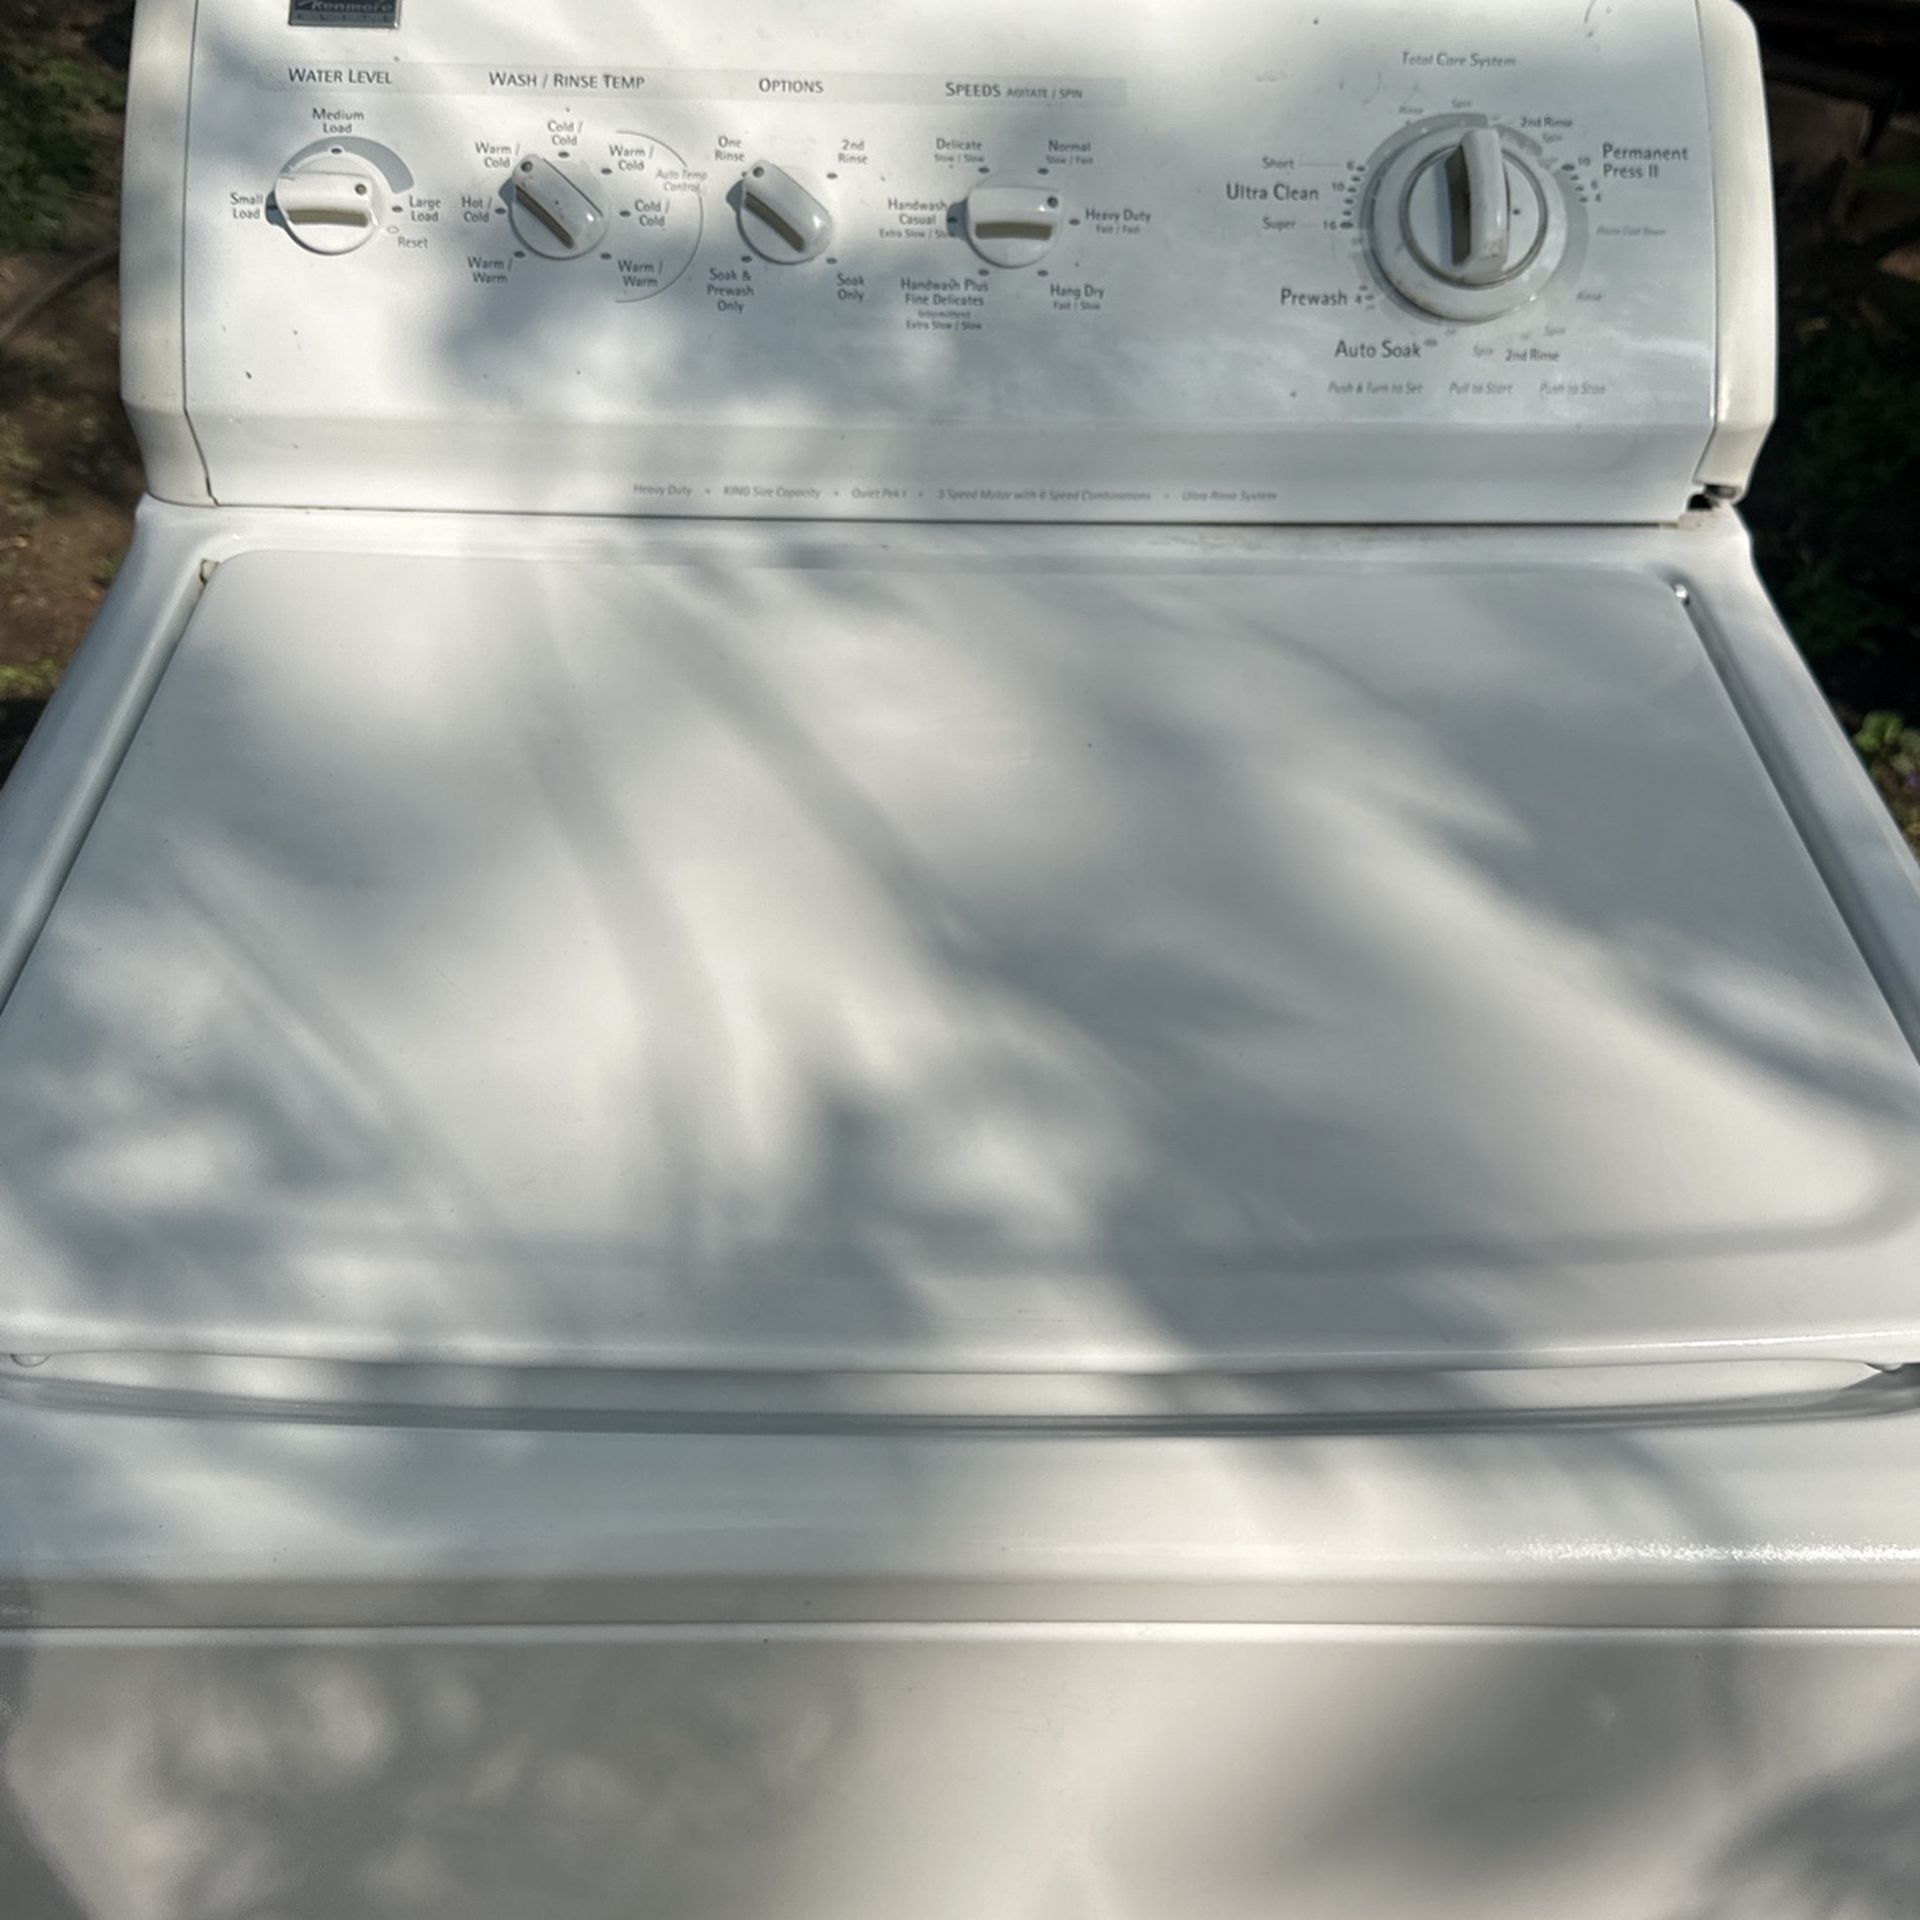 Kenmore Elite Washer With Warranty